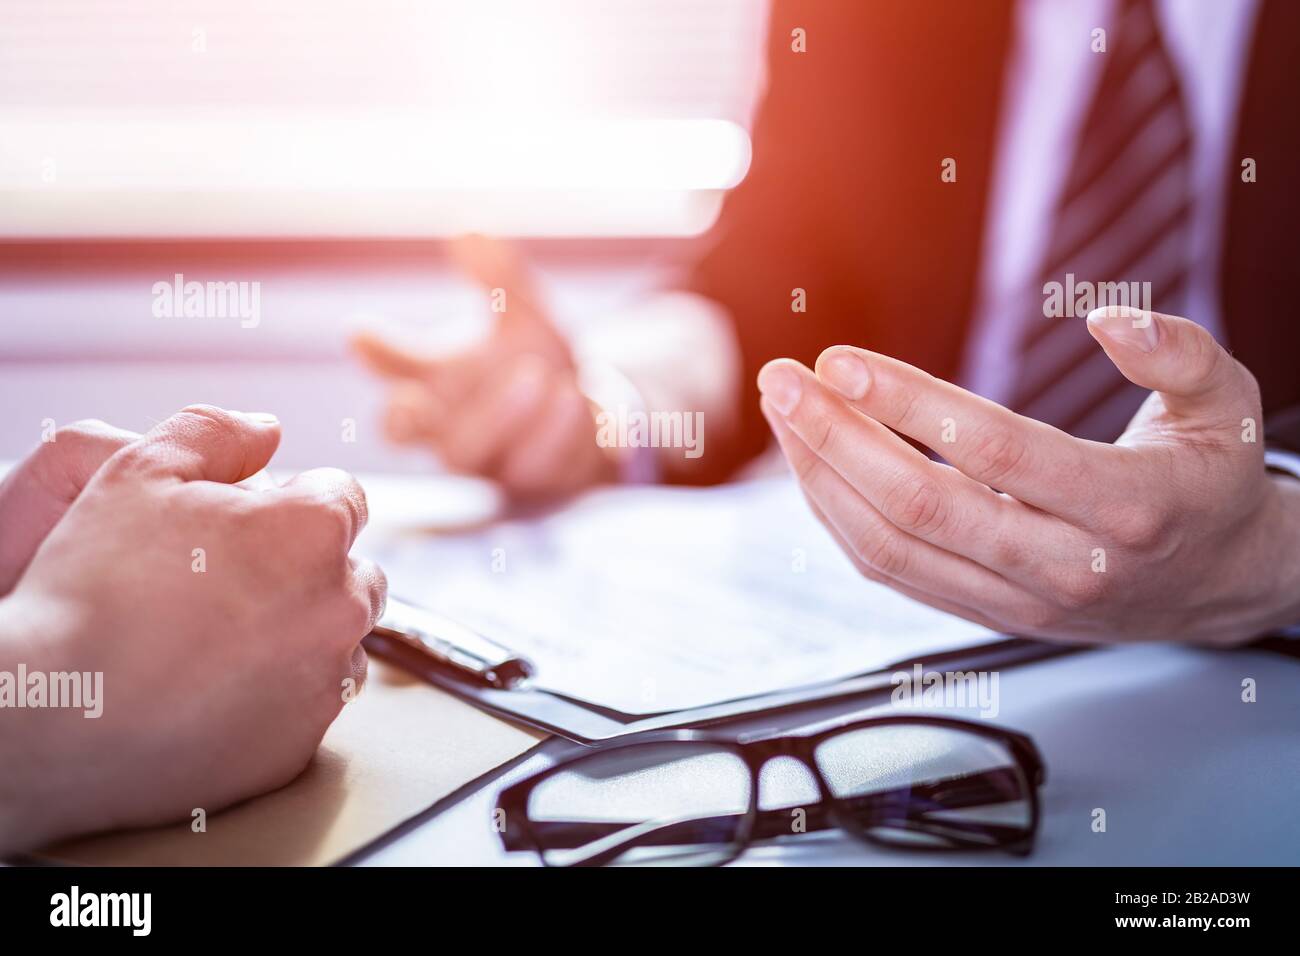 Business people negotiating a contract. Human hands working with documents at desk and signing contract. Stock Photo